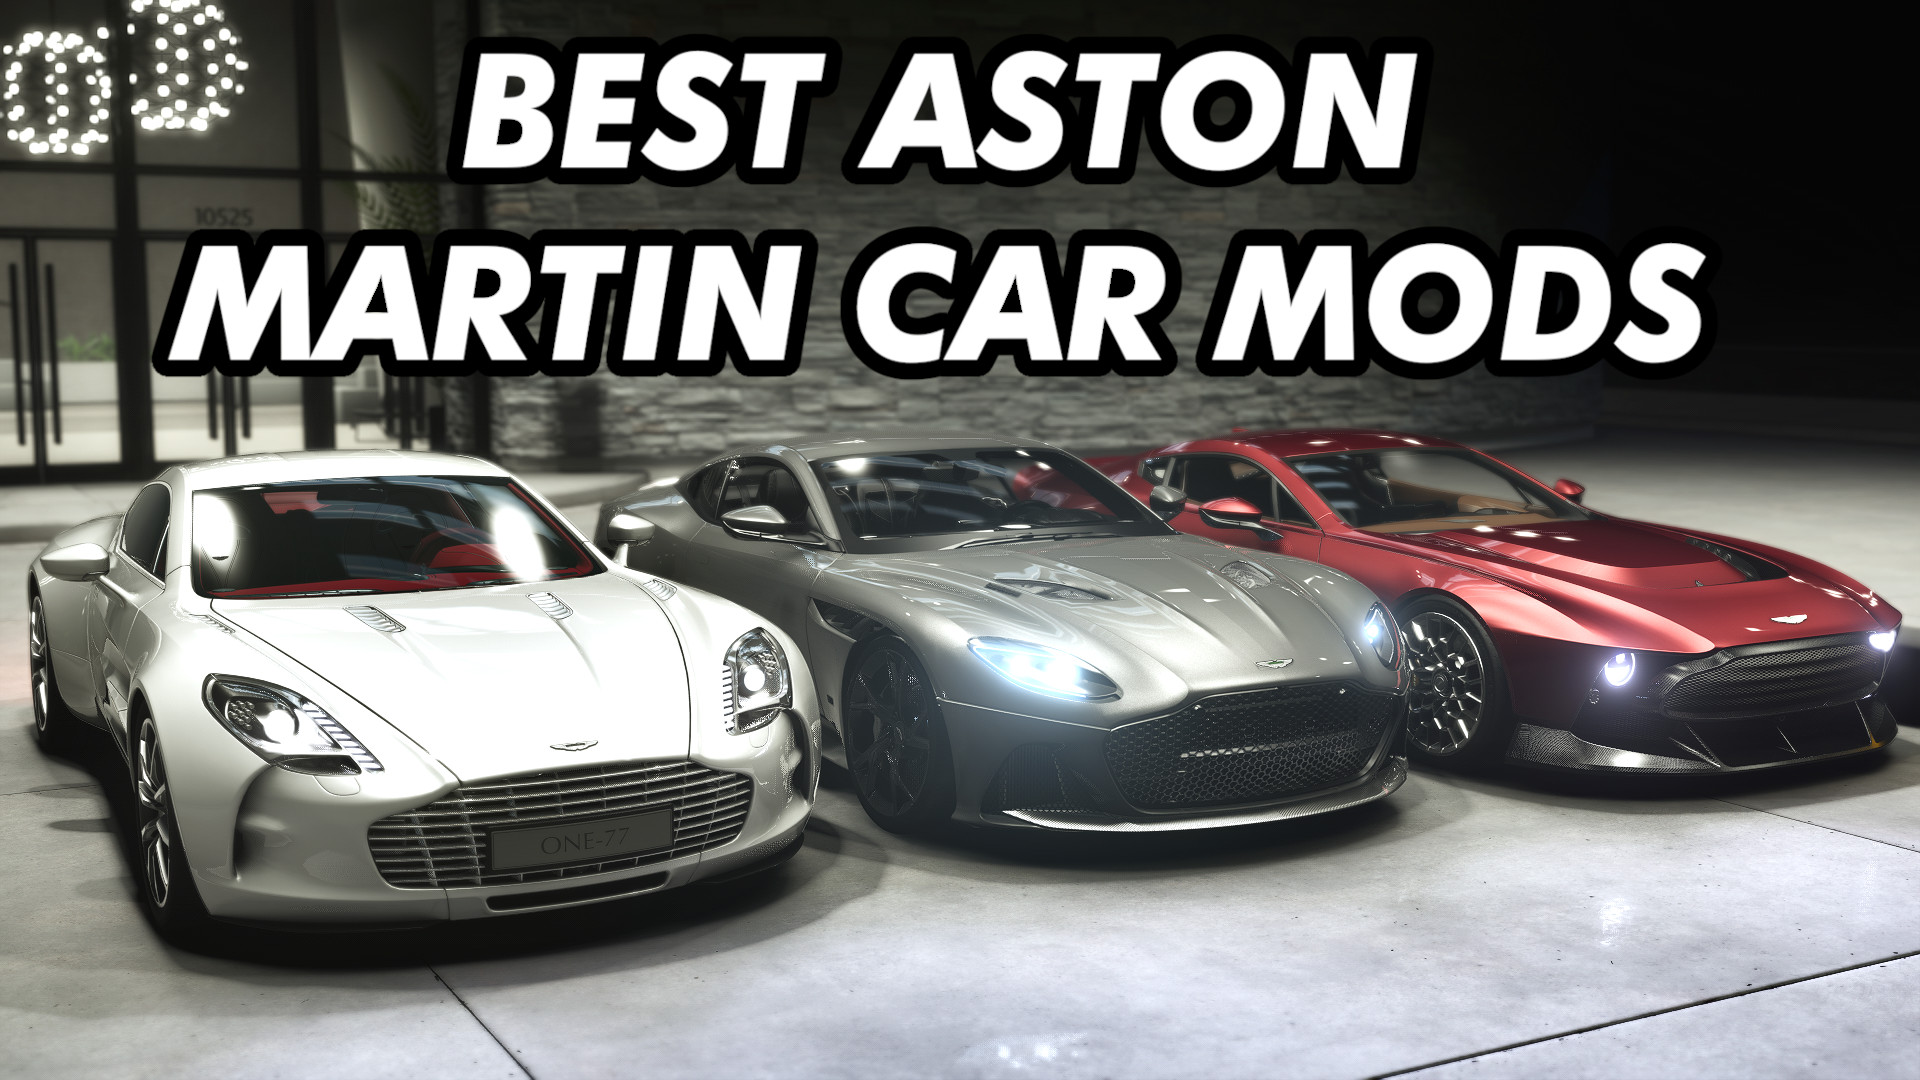 The Best Assetto Corsa Mods: 10 Best Mods To Install 2023